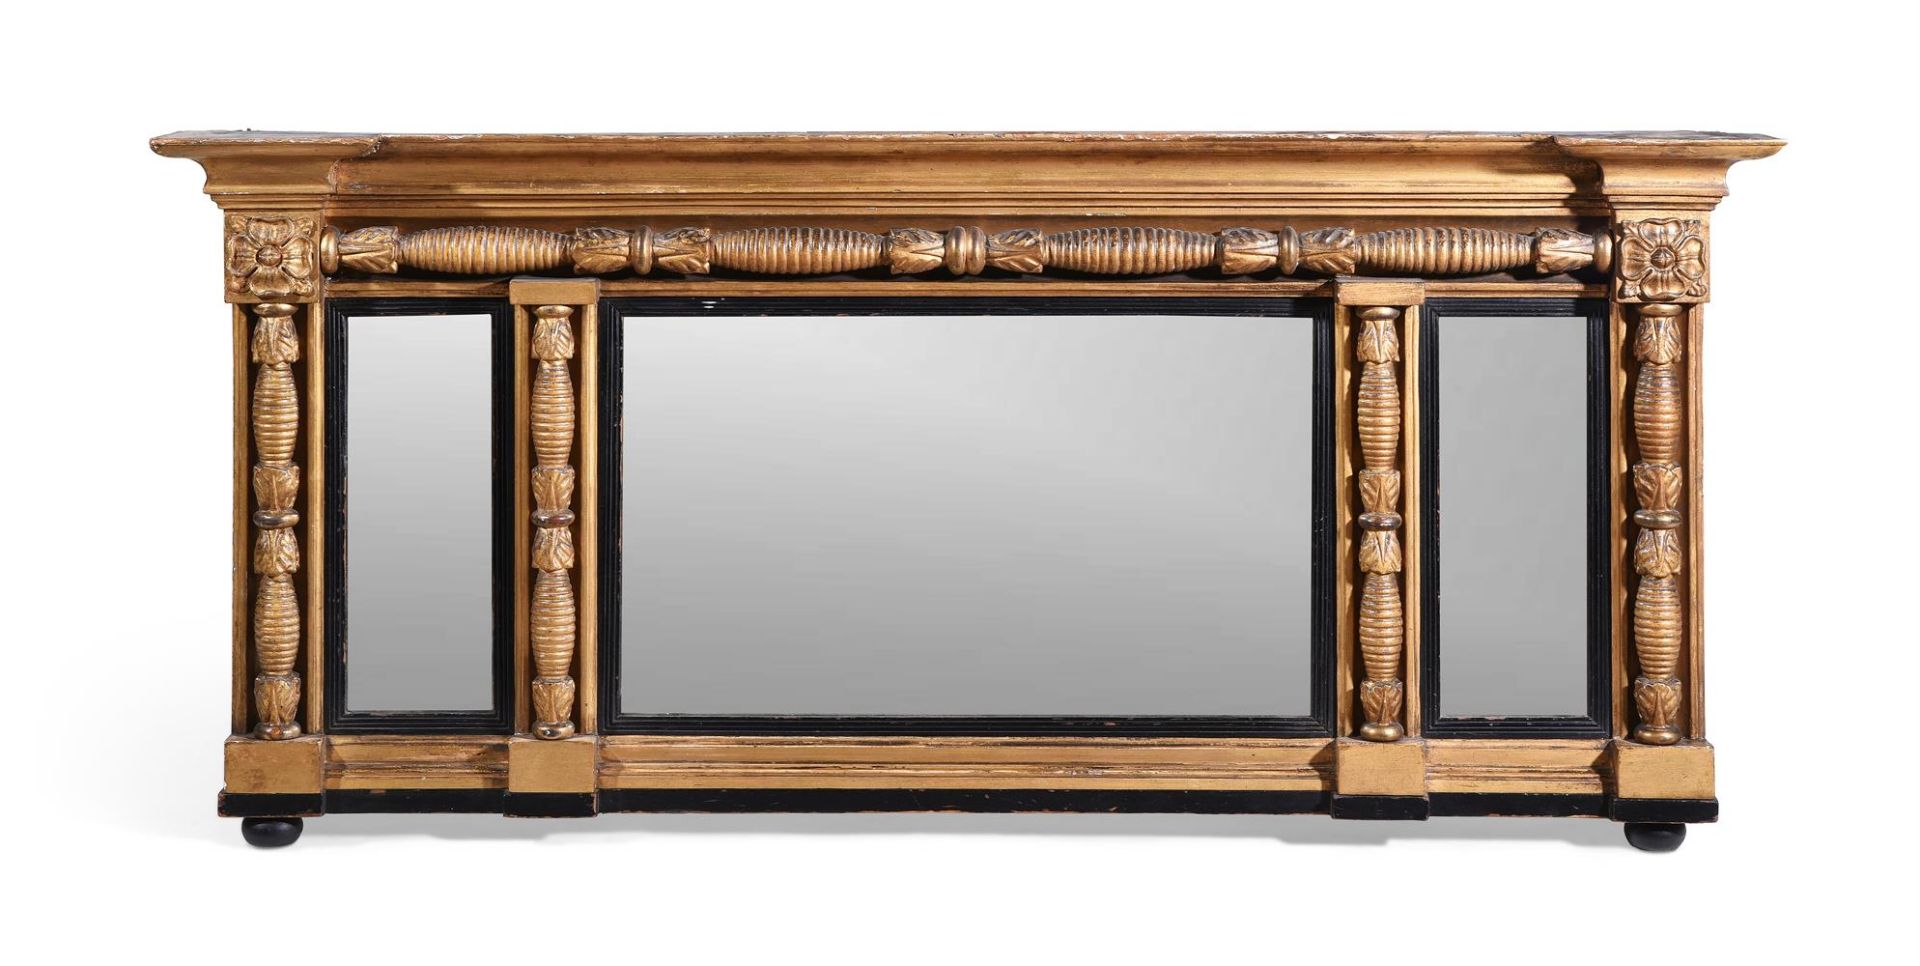 A REGENCY CARVED GILTWOOD, GESSO AND EBONISED TRIPTYCH OVERMANTLE MIRROR, CIRCA 1820